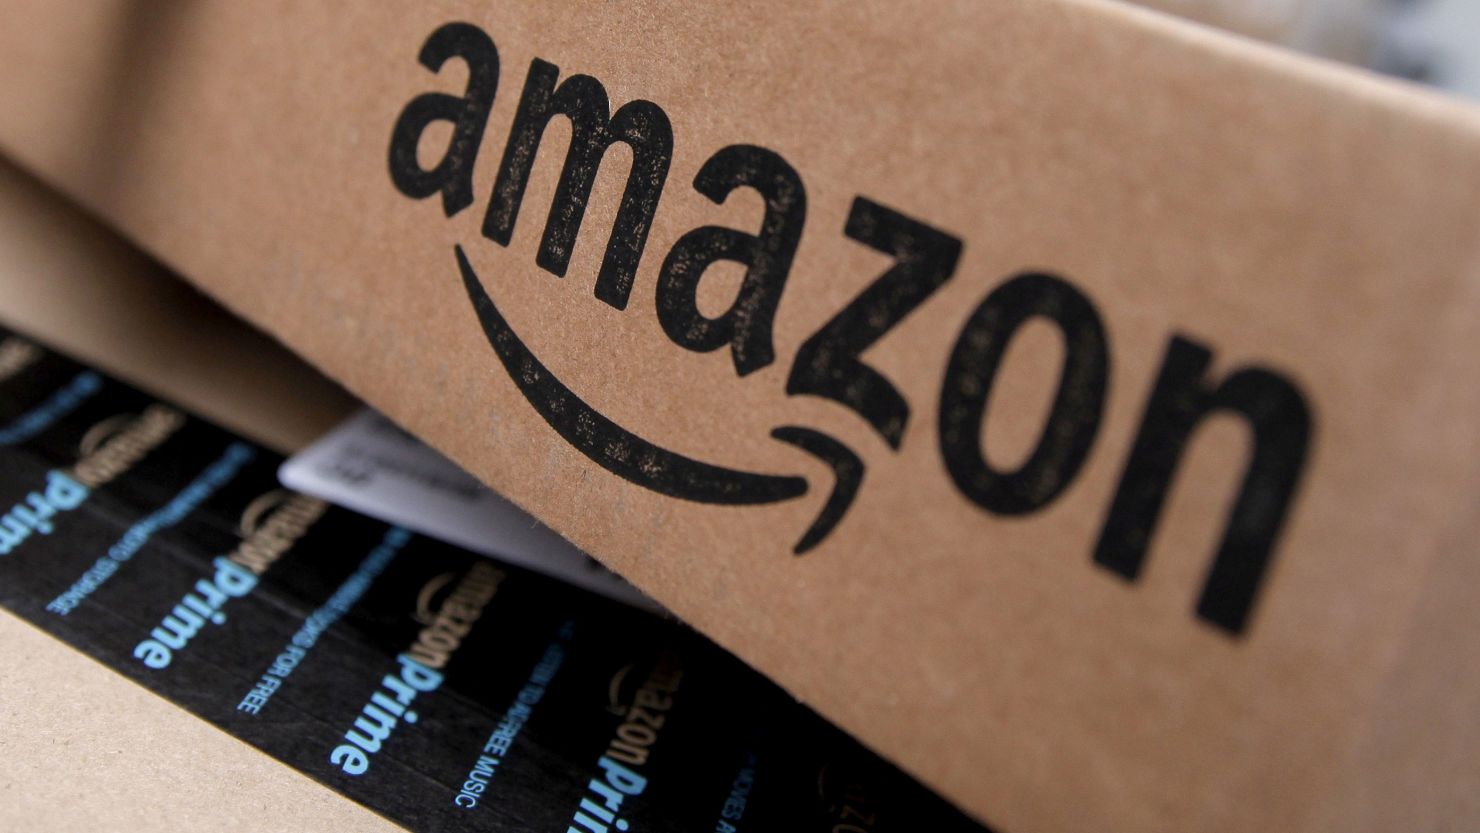 Amazon is among the companies the FCC says it is investigating for the sale of illegal GPS jamming devices.